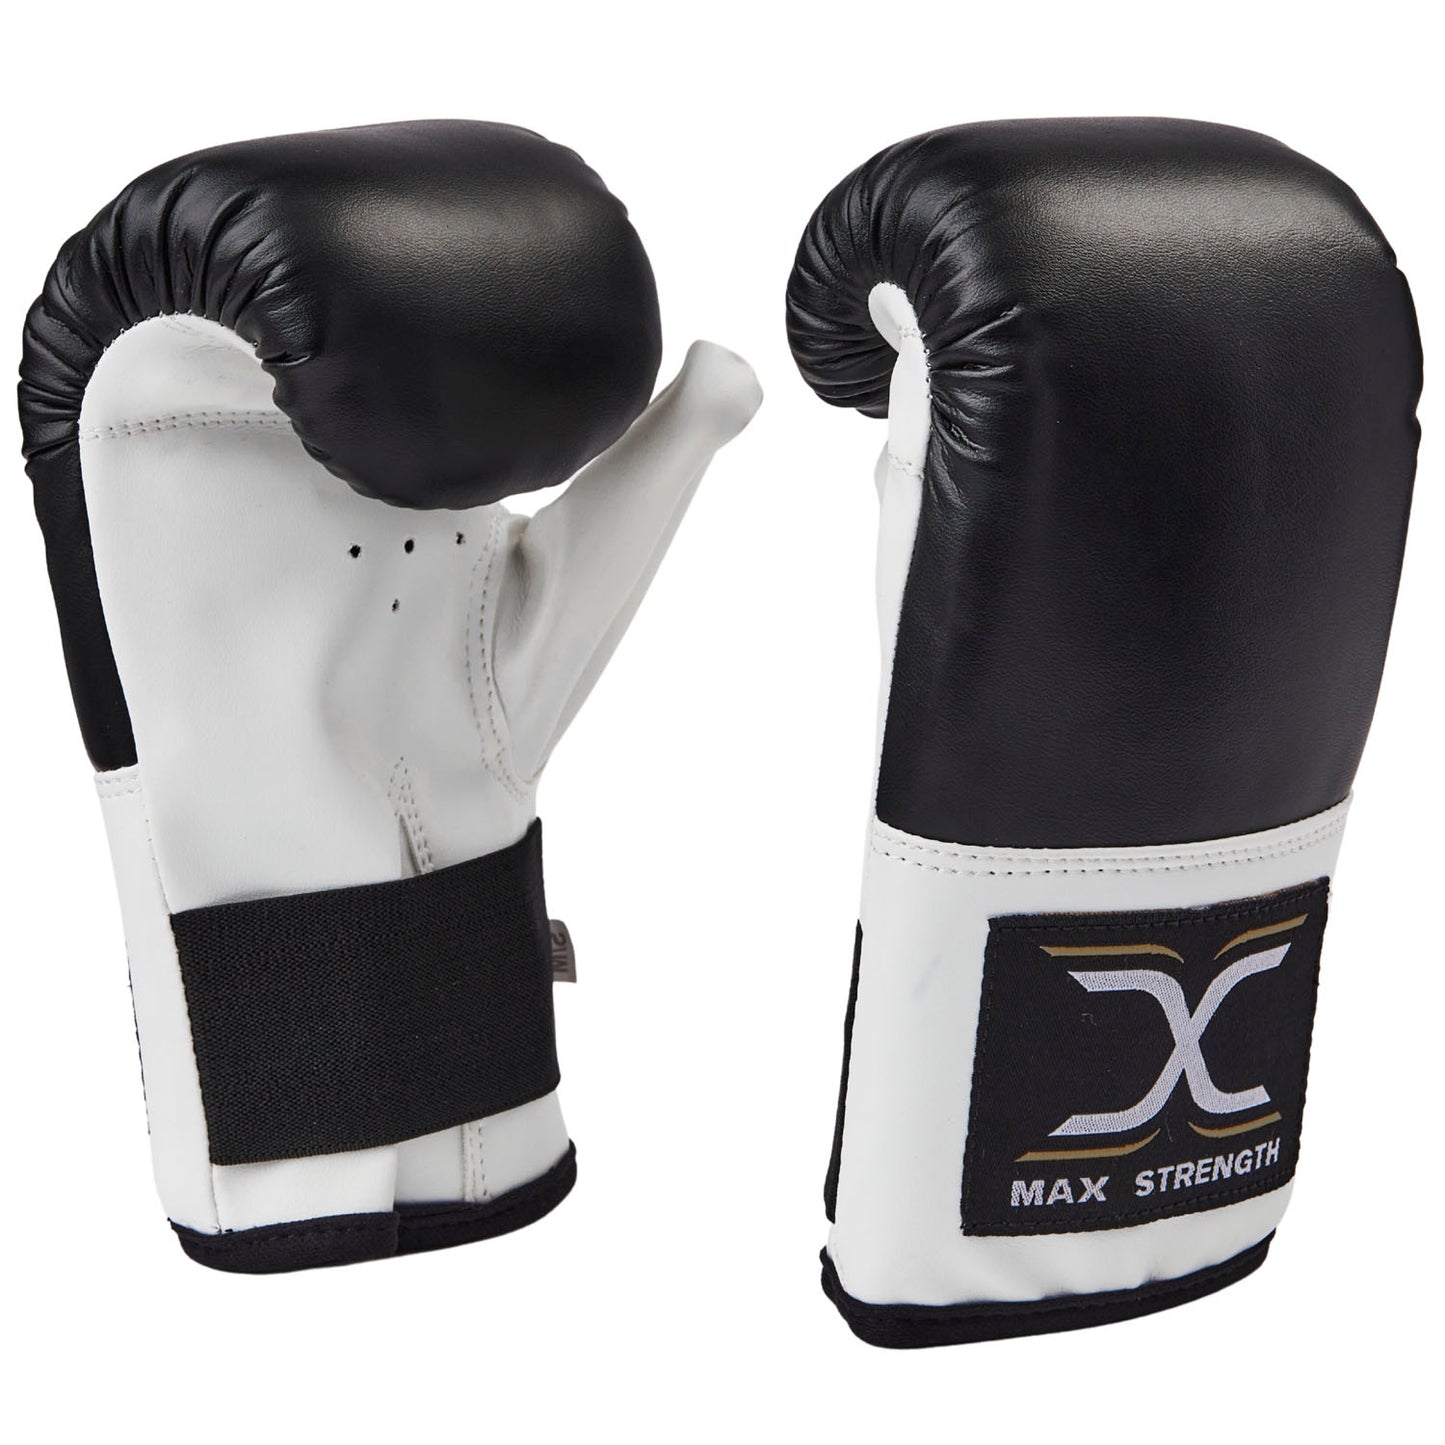 MAXSTRENGTH Boxing Punch Bag Mitts Black/White